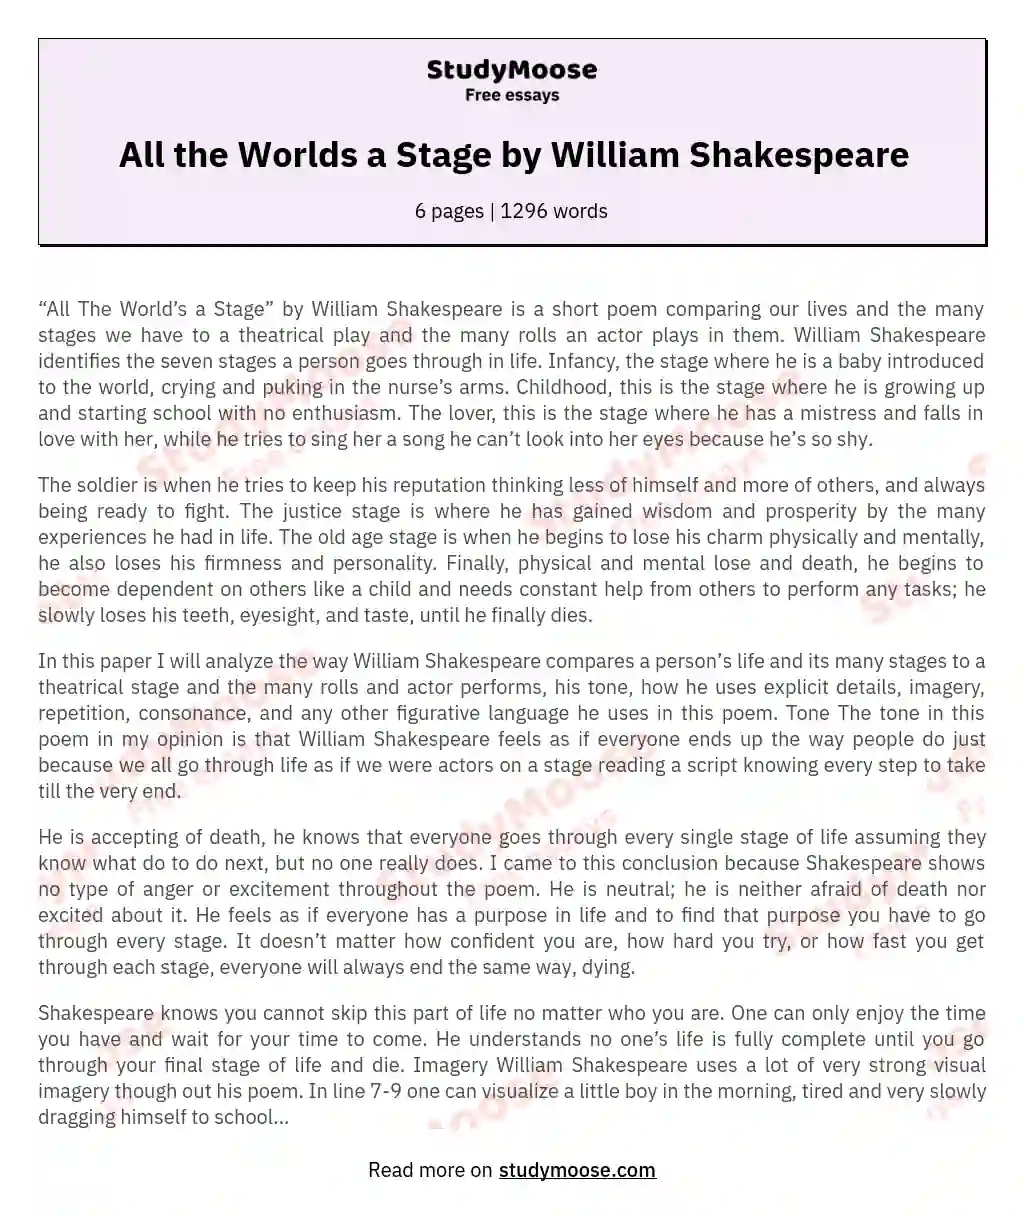 All the Worlds a Stage by William Shakespeare essay